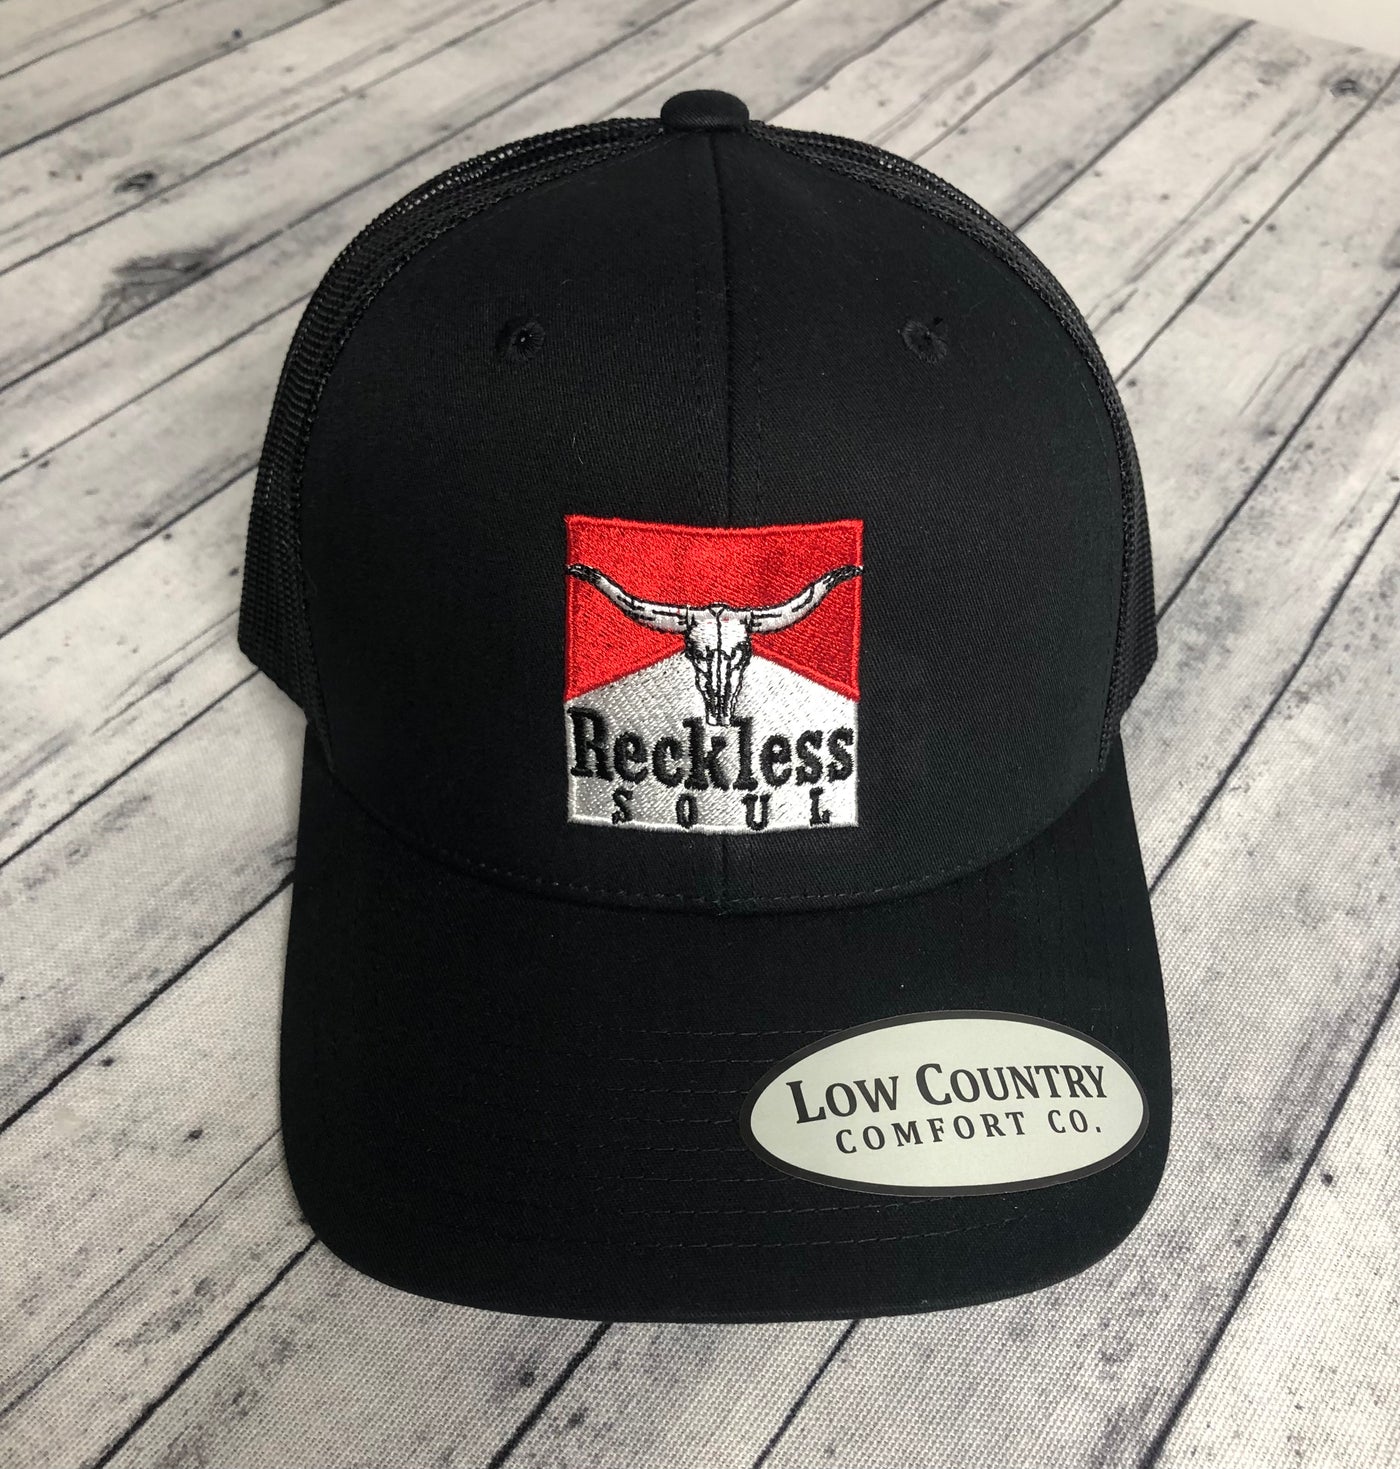 Low Country Comfort Co. Reckless Soul Skull Reds Black